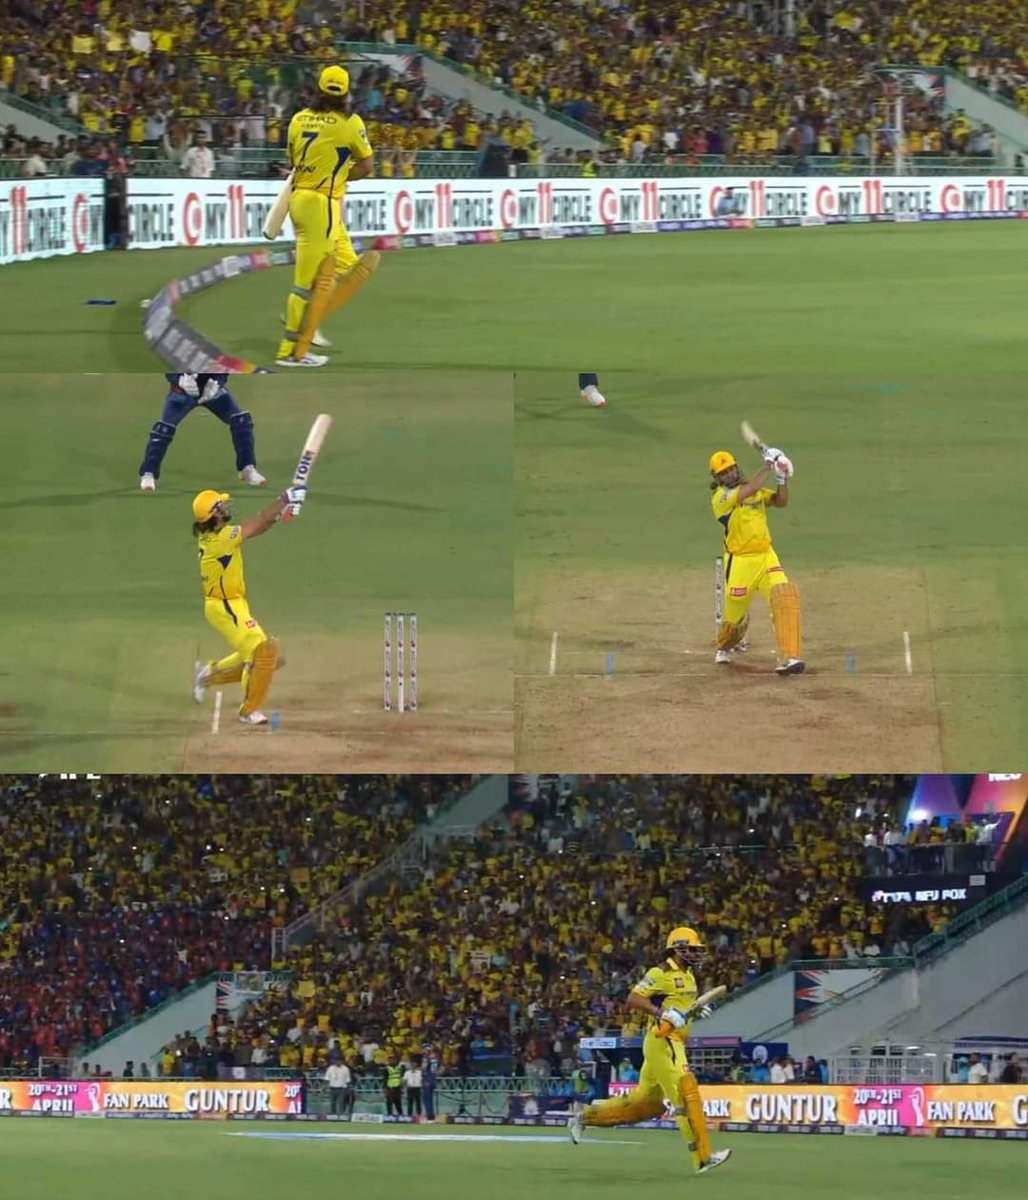 Enough for tonight. Goodnight CSK nation.